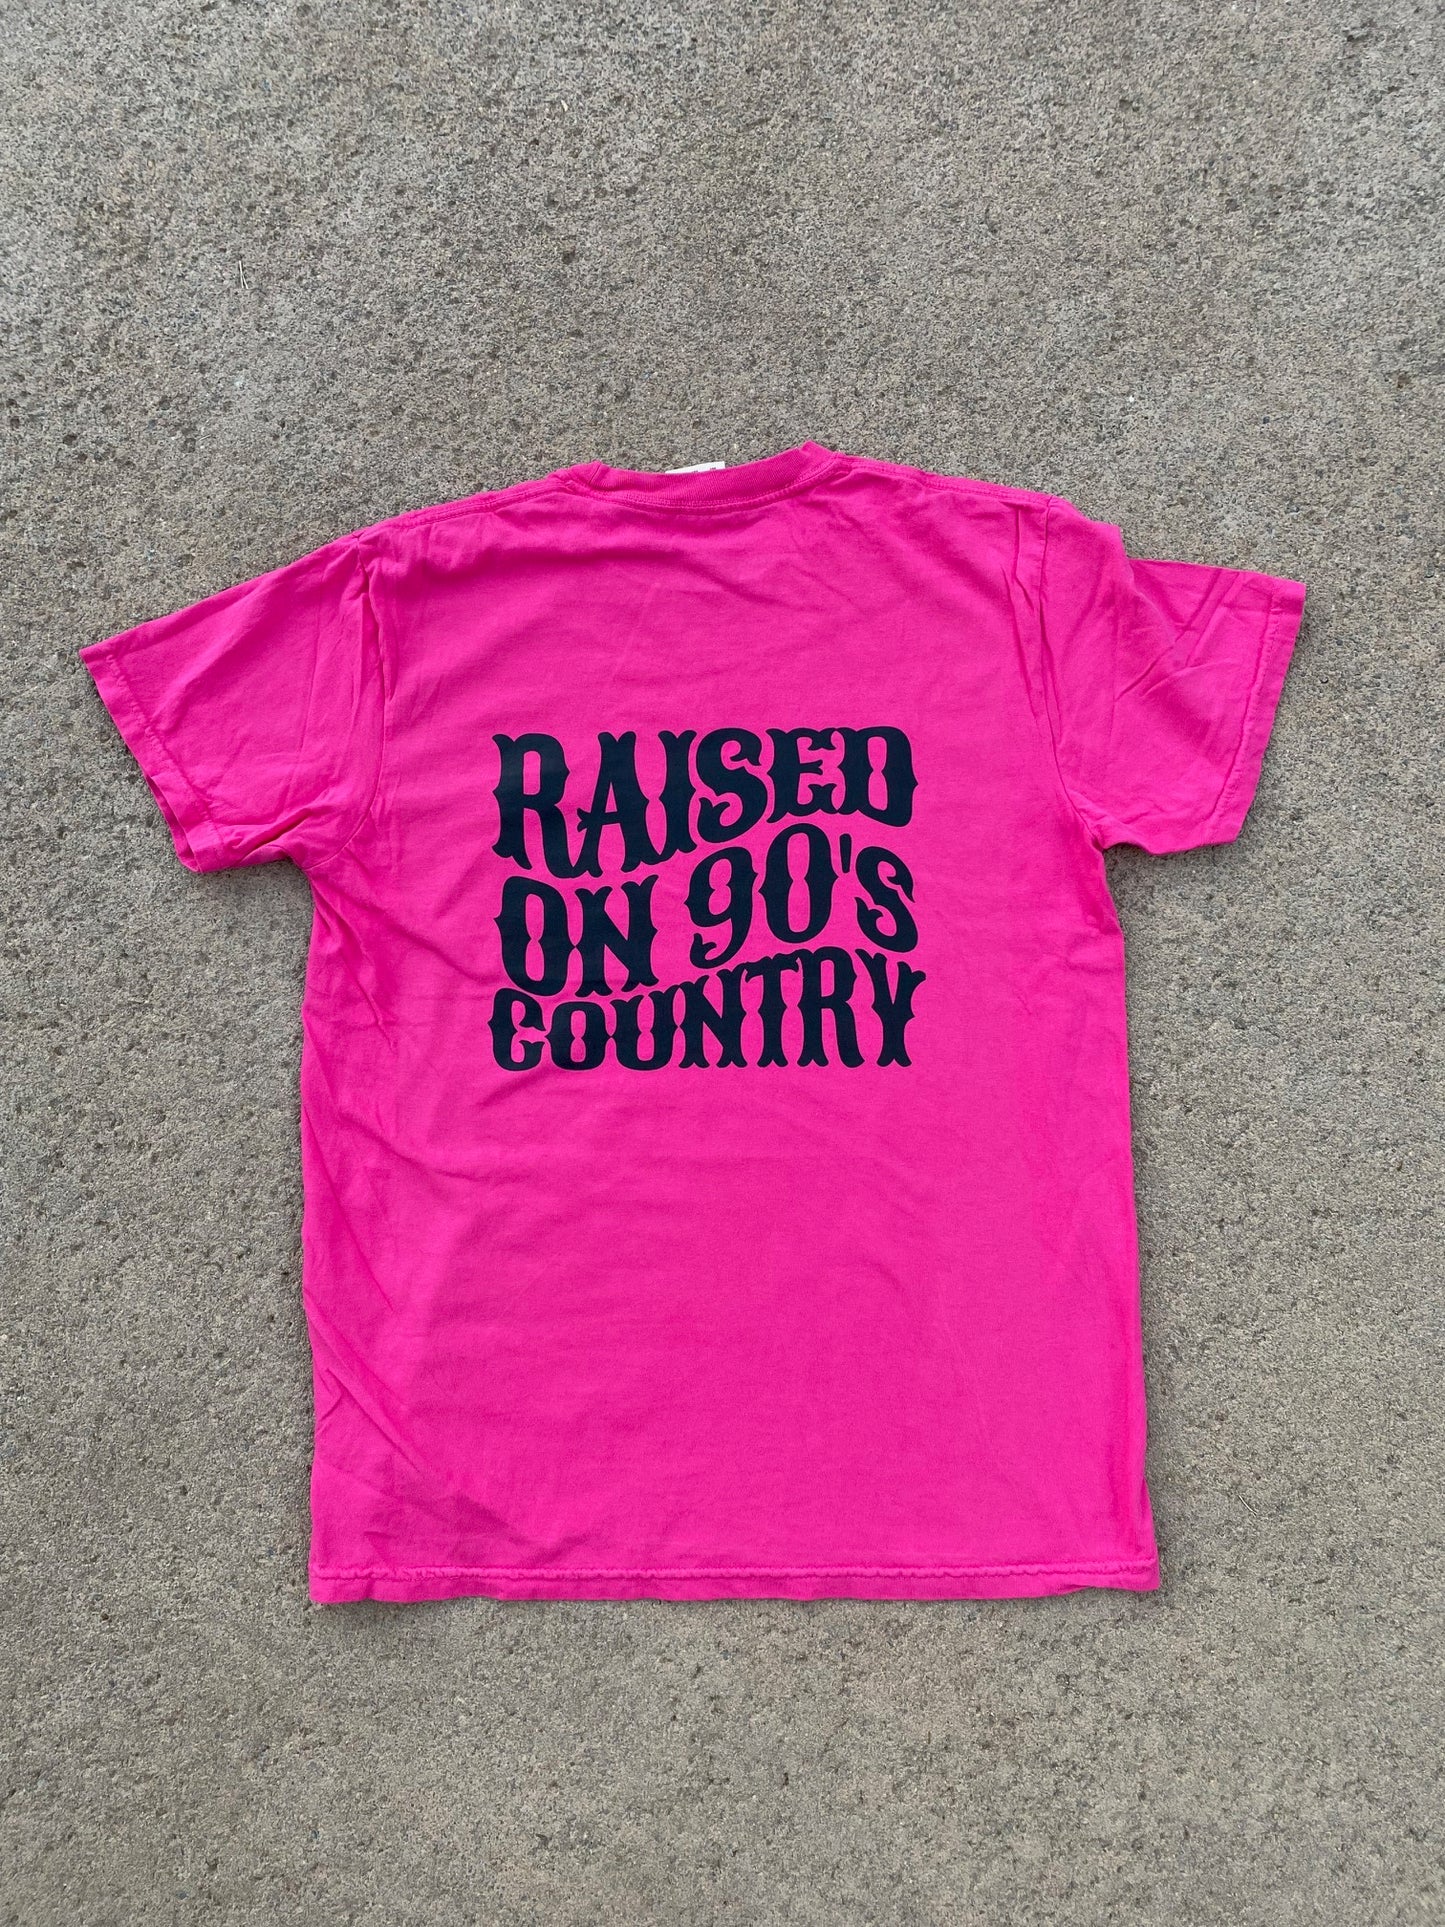 Raised on 90s Country Bright Pink Graphic T-Shirt Cotton Top